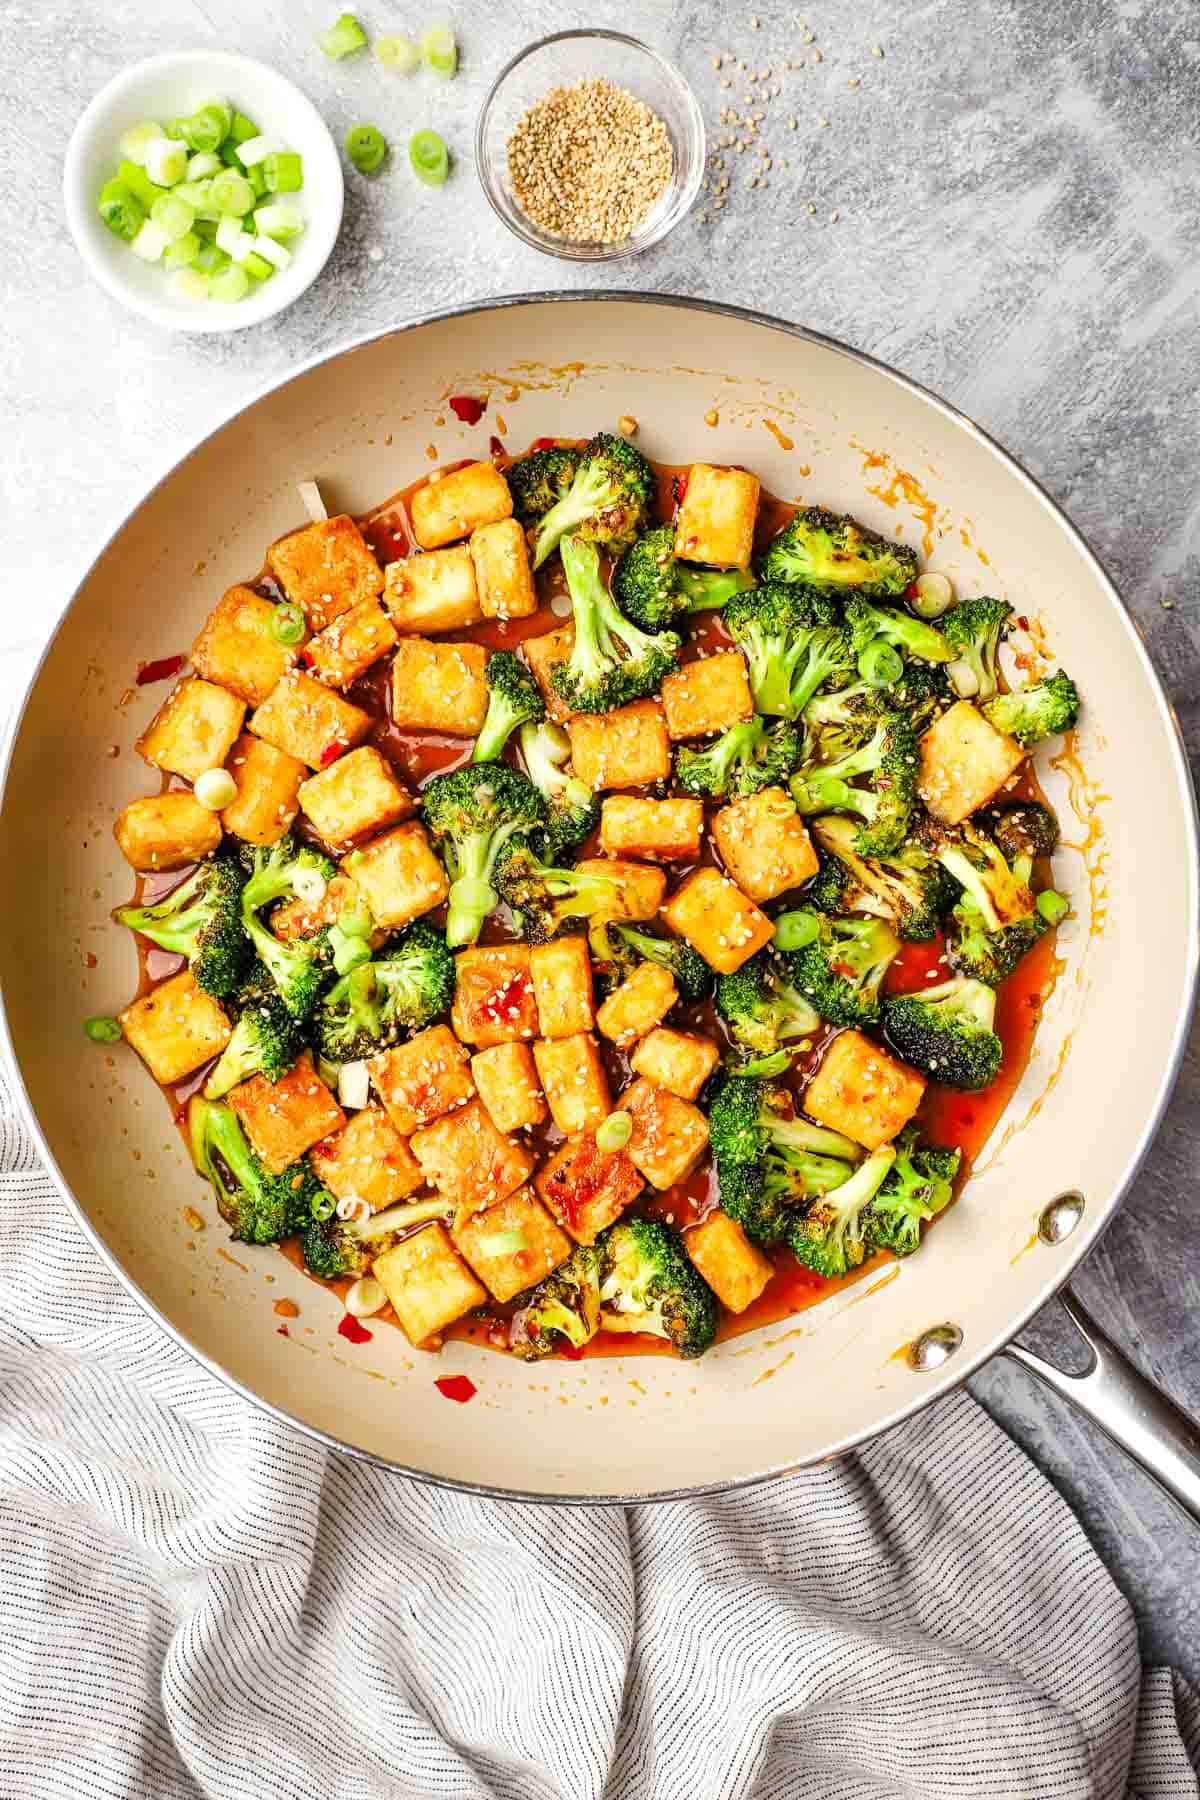 broccoli and tofu added to the pan with the sauce